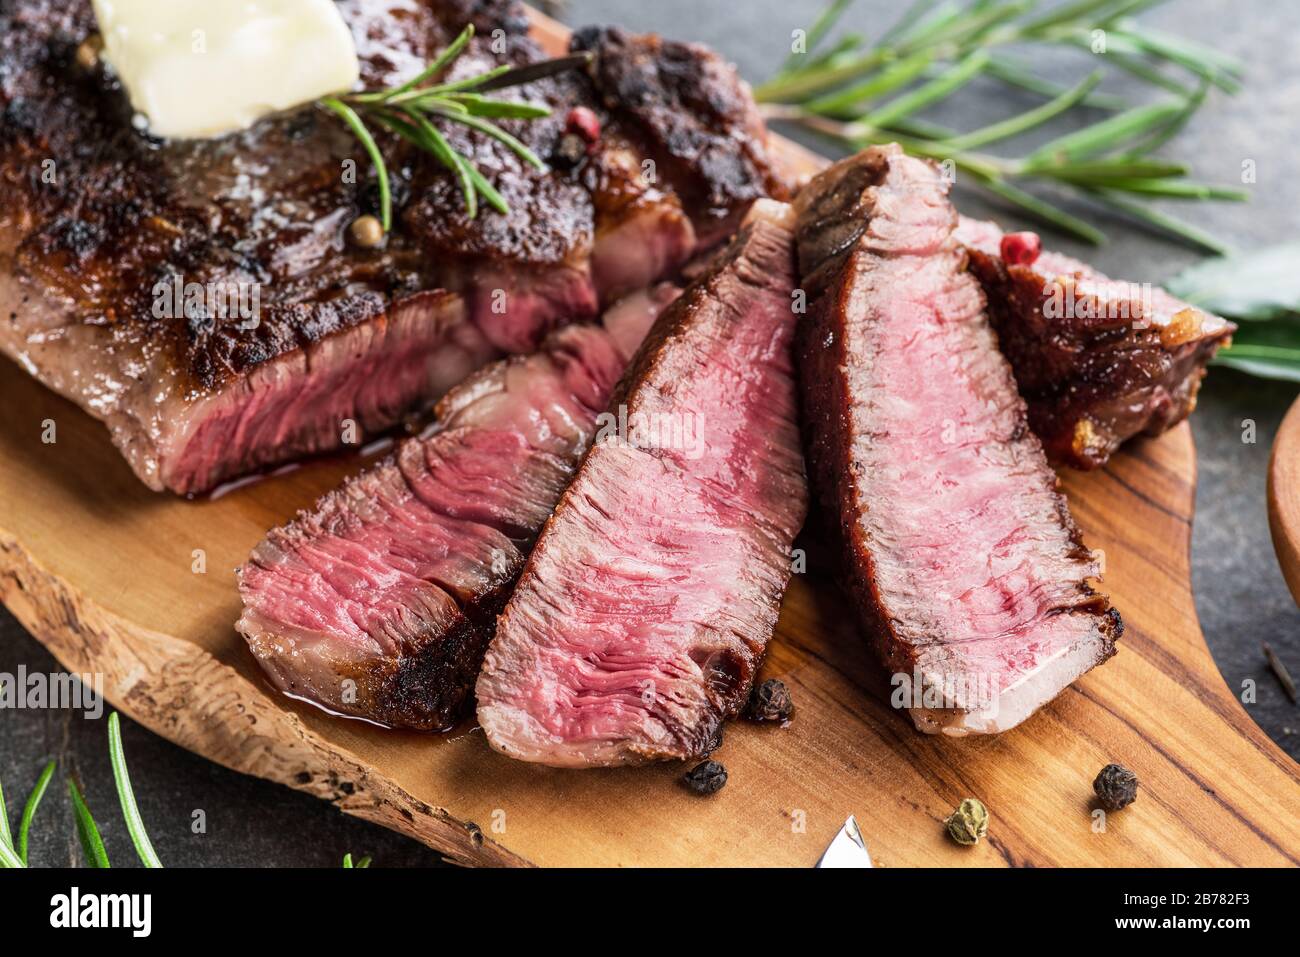 Medium rare Ribeye steak with herbs and a piece of butter on the wooden tray. Stock Photo